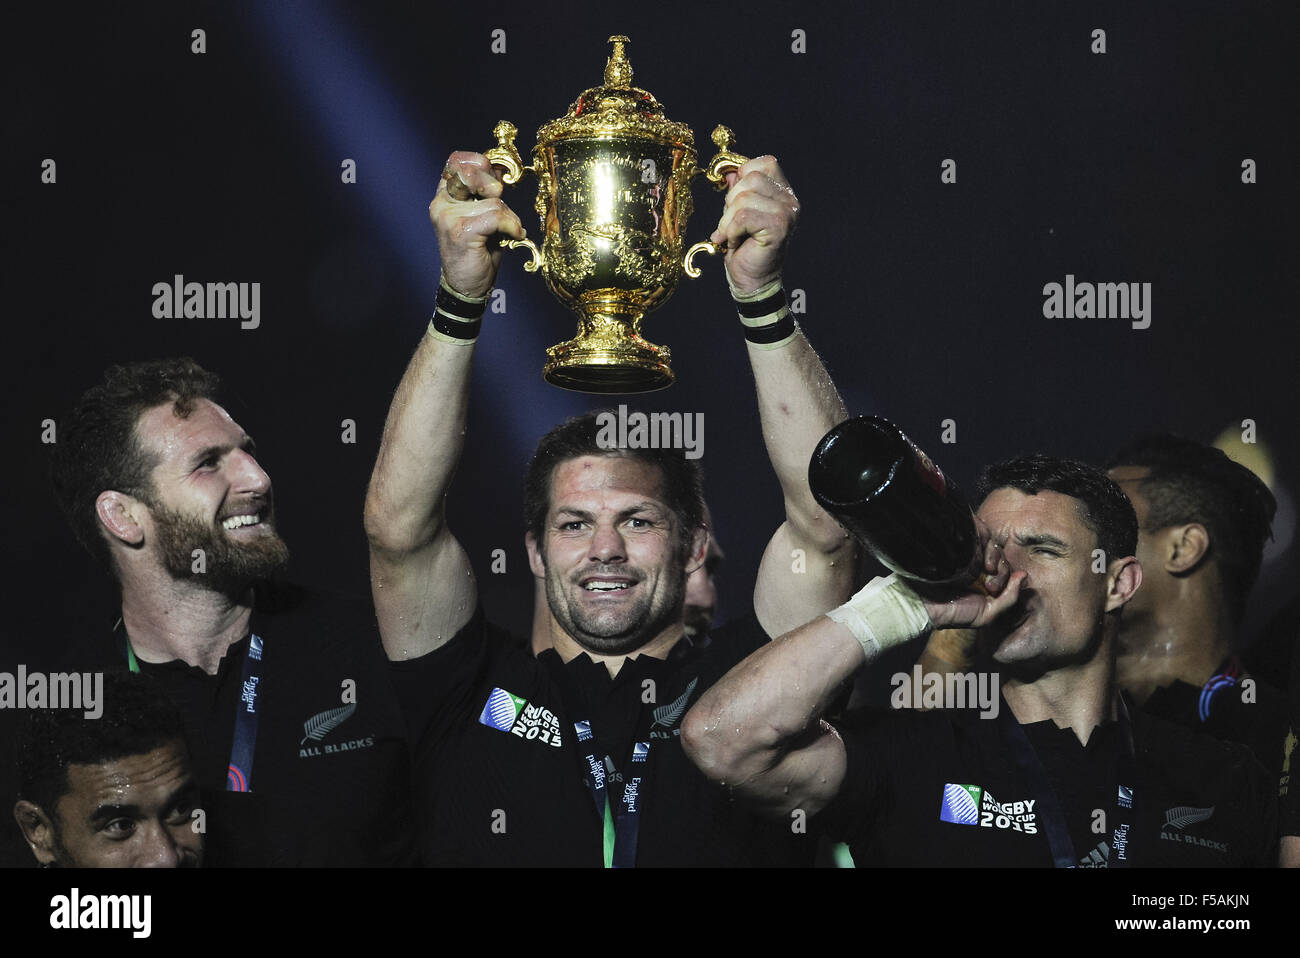 London, UK. 31st Oct, 2015. LONDON - OCTOBER 31: New Zealand's Richie McCaw lifts the Webb Ellis Trophy as Kieran Read looks on and Dan Carter enjoys the champagne after New Zealand defeats Australia 34-17 at the 2015 Rugby World cup Championship match at Twickenham Stadium in London. Photo Credit: Bigshots Photo.Credit: Andrew Patron/Zuma Wire © Andrew Patron/ZUMA Wire/Alamy Live News Stock Photo